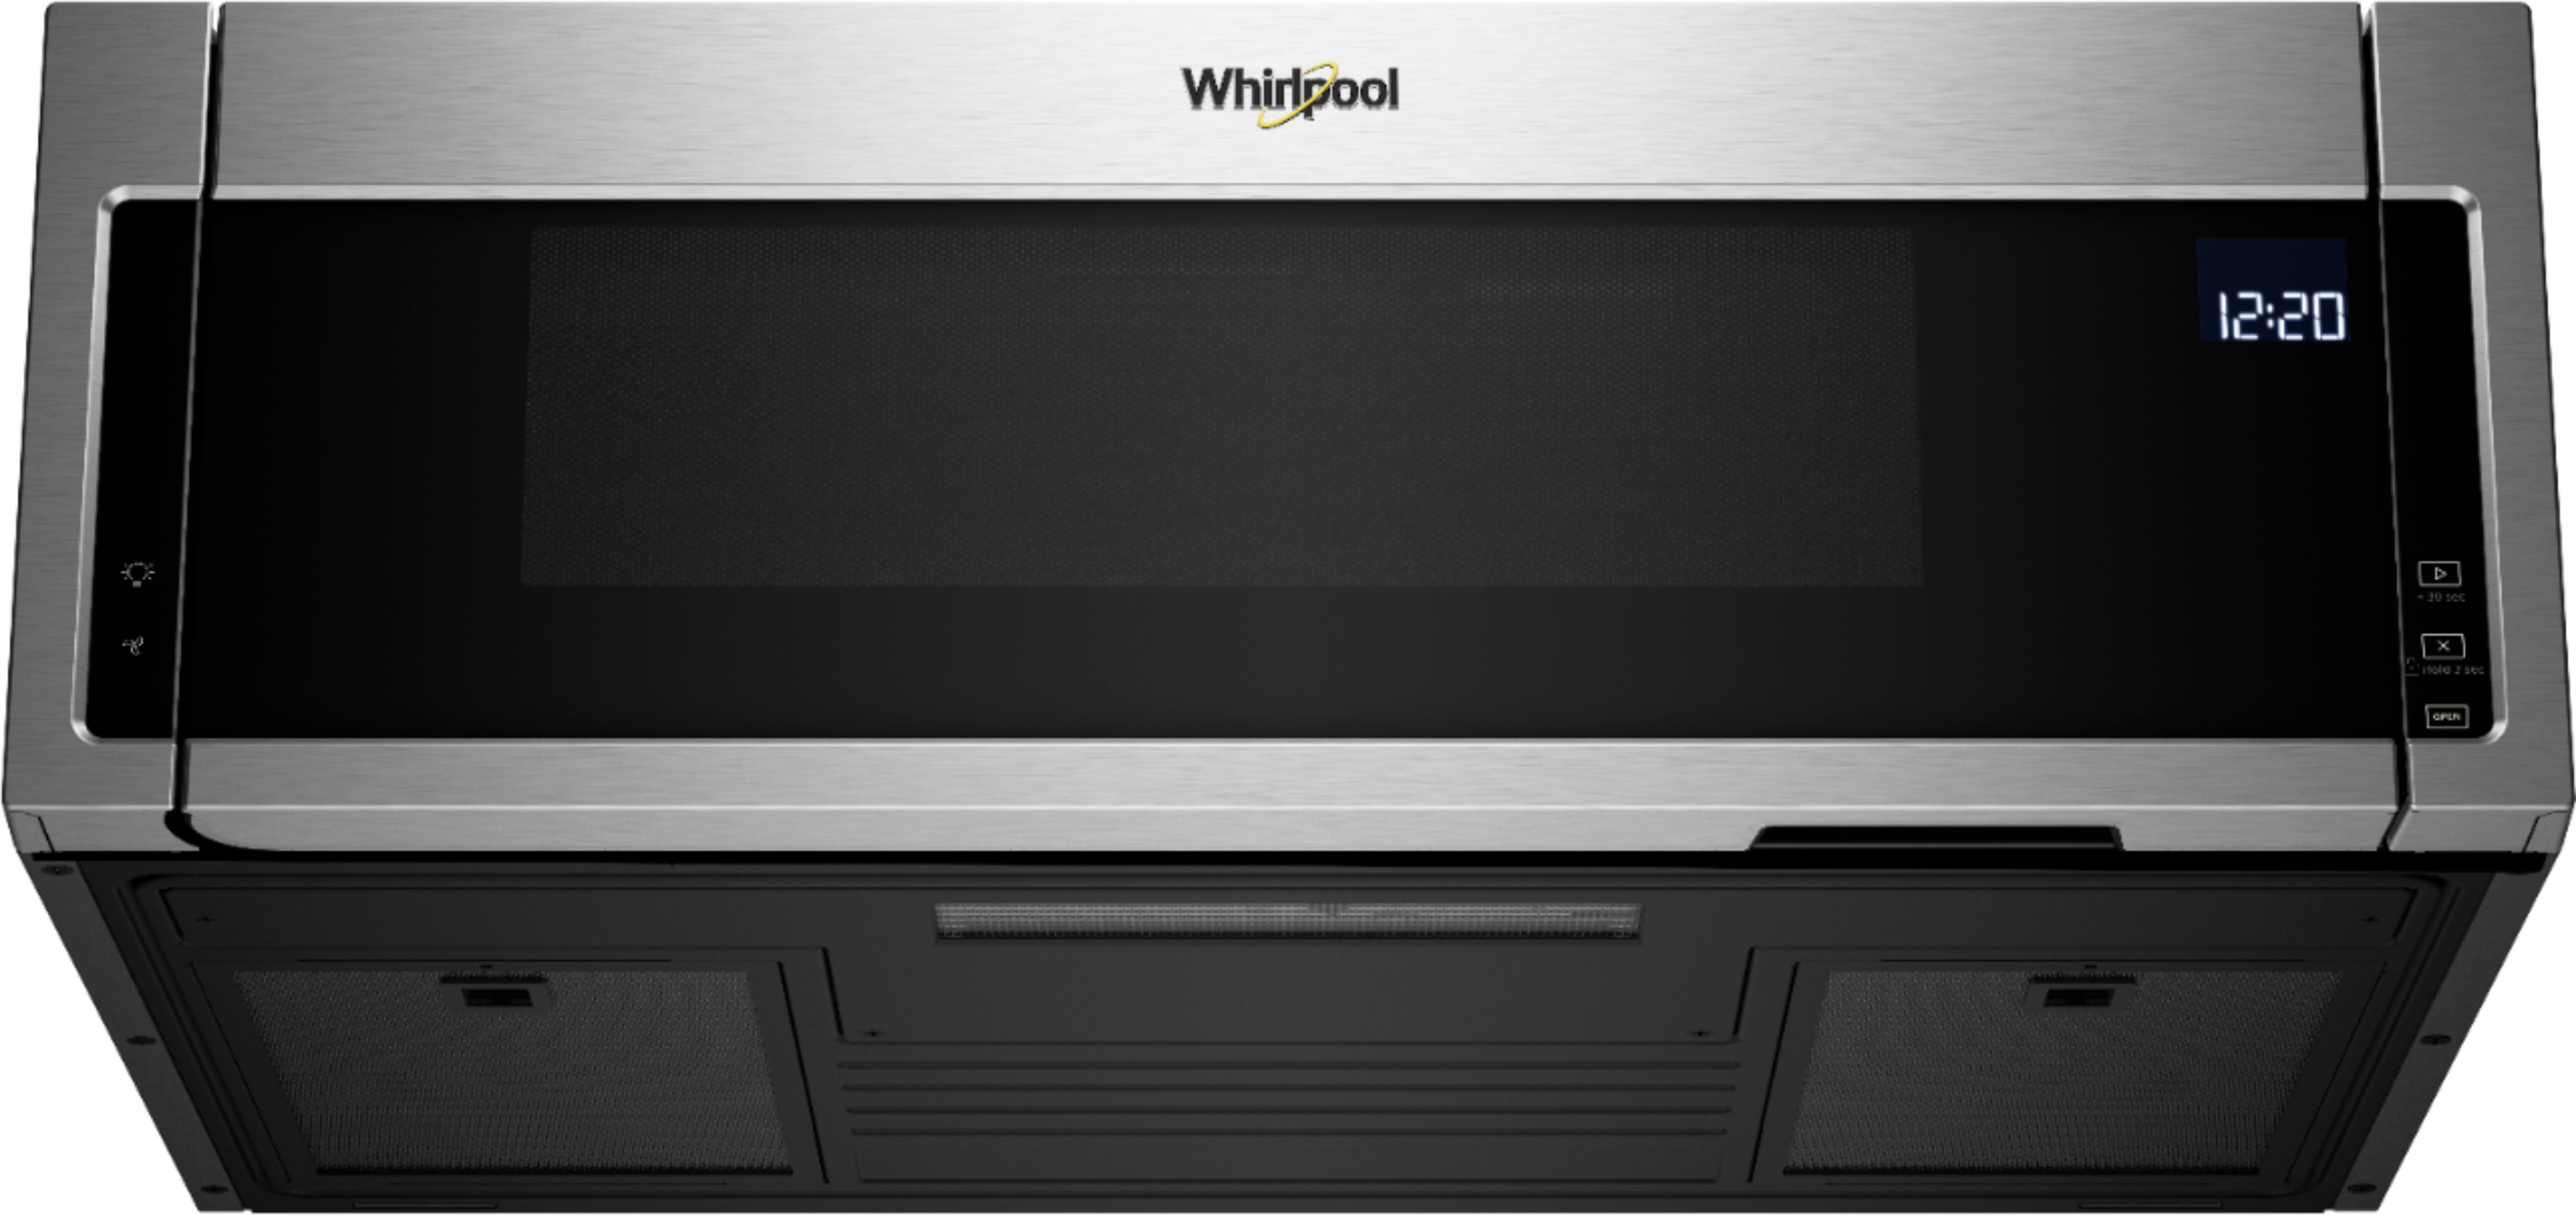 Customer Reviews: Whirlpool 1.1 Cu. Ft. Low Profile Over-the-Range